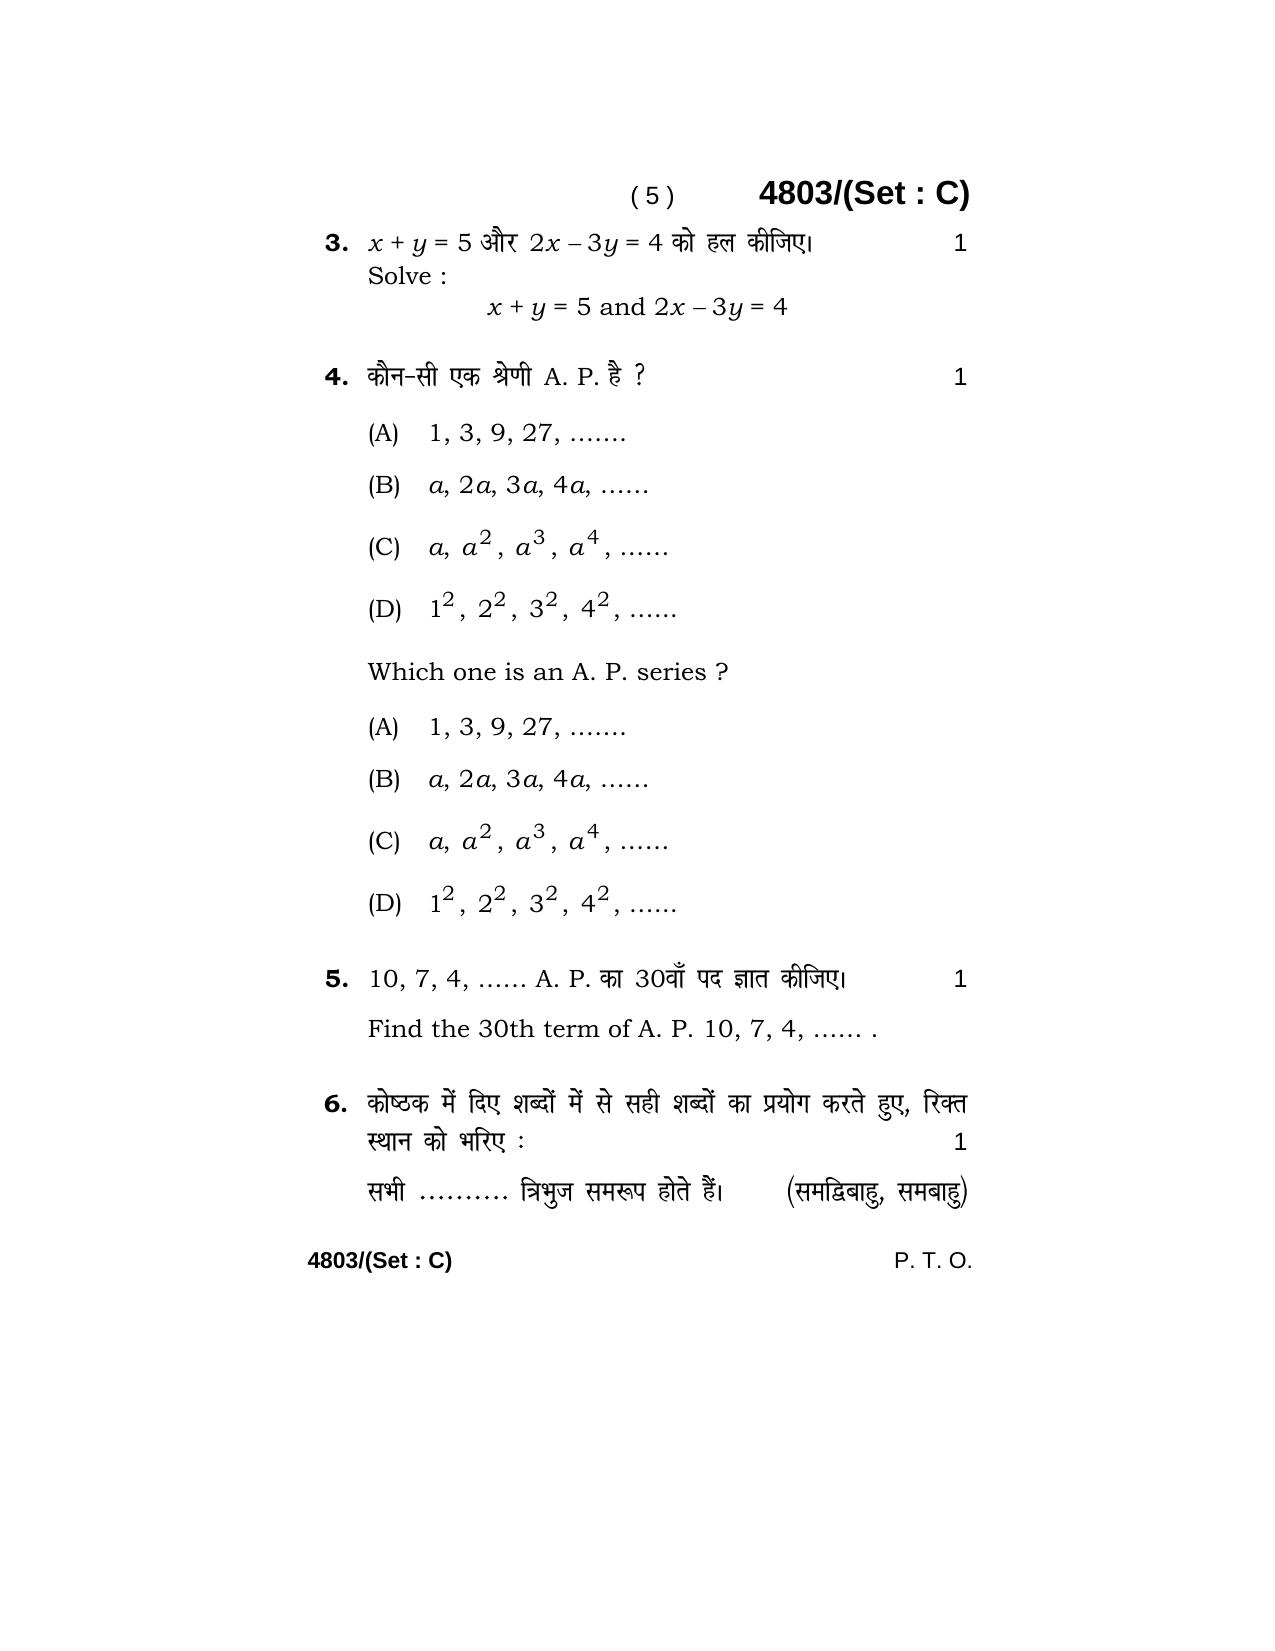 Haryana Board HBSE Class 10 Mathematics 2020 Question Paper - Page 37